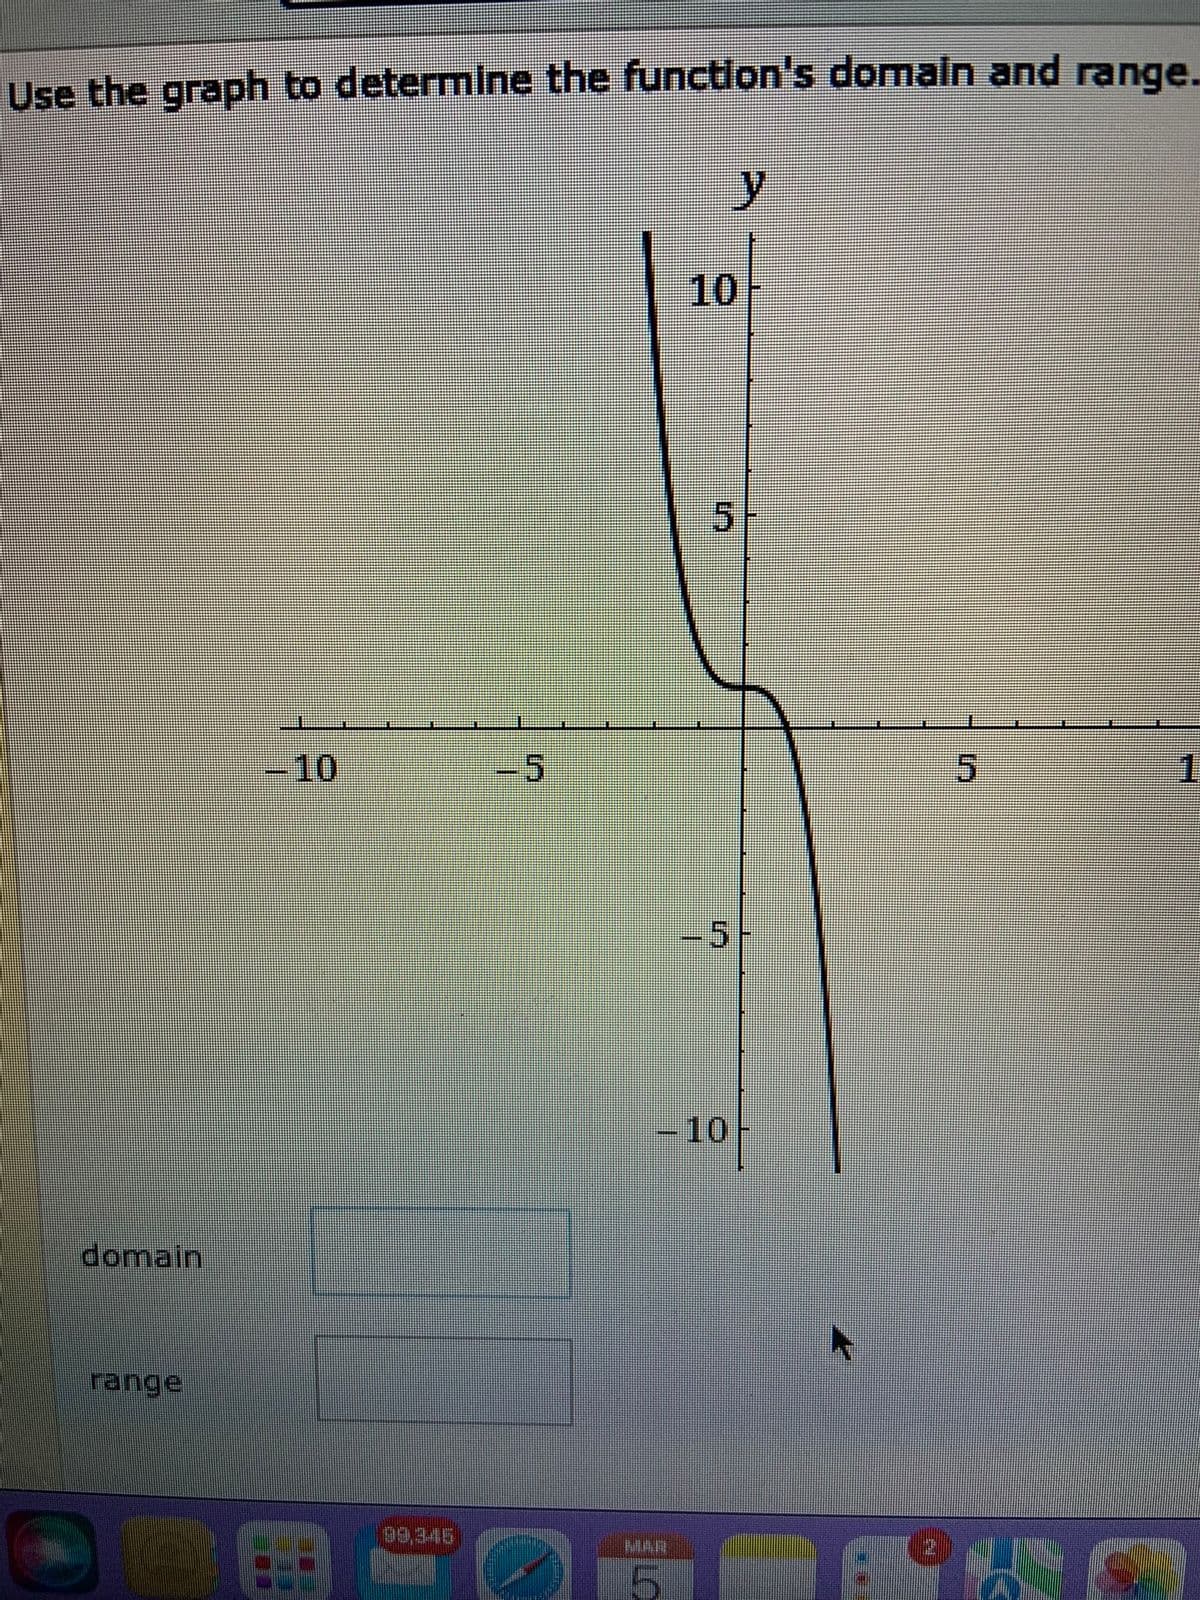 Use the graph to determine the function's domaln and range.
y.
10
-10
5.
1
-5
- 10
domain
